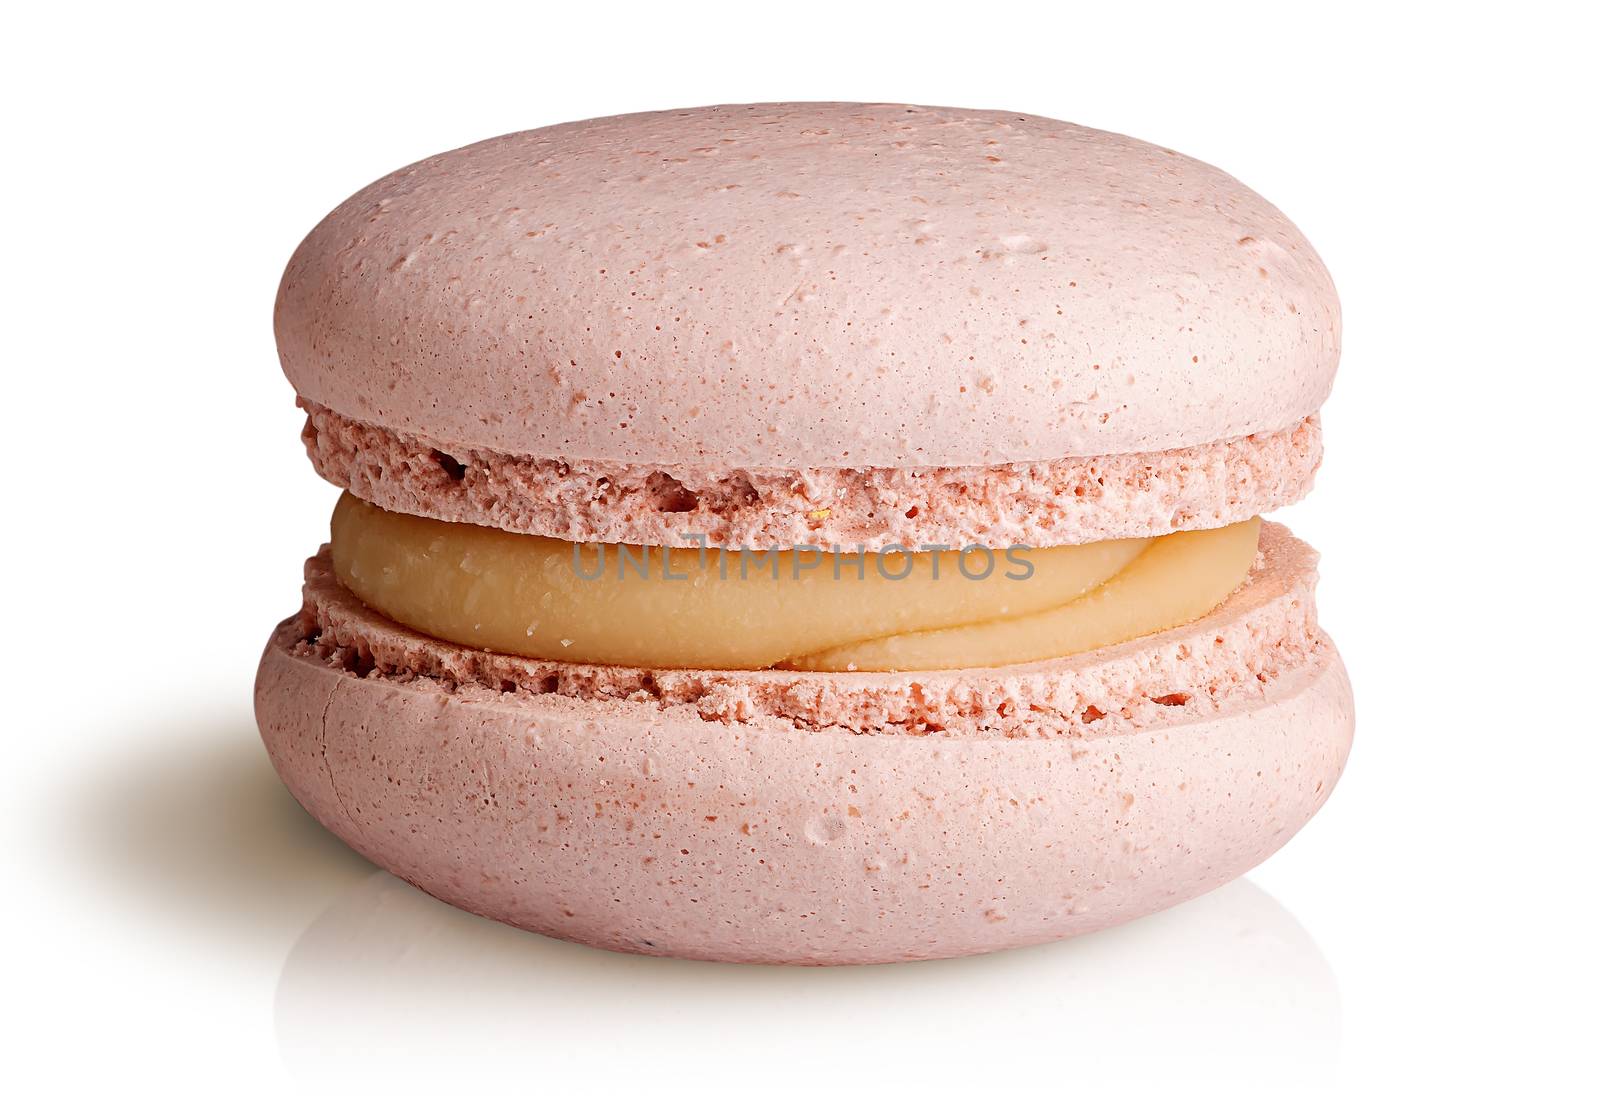 One beige macaroon front view on white background